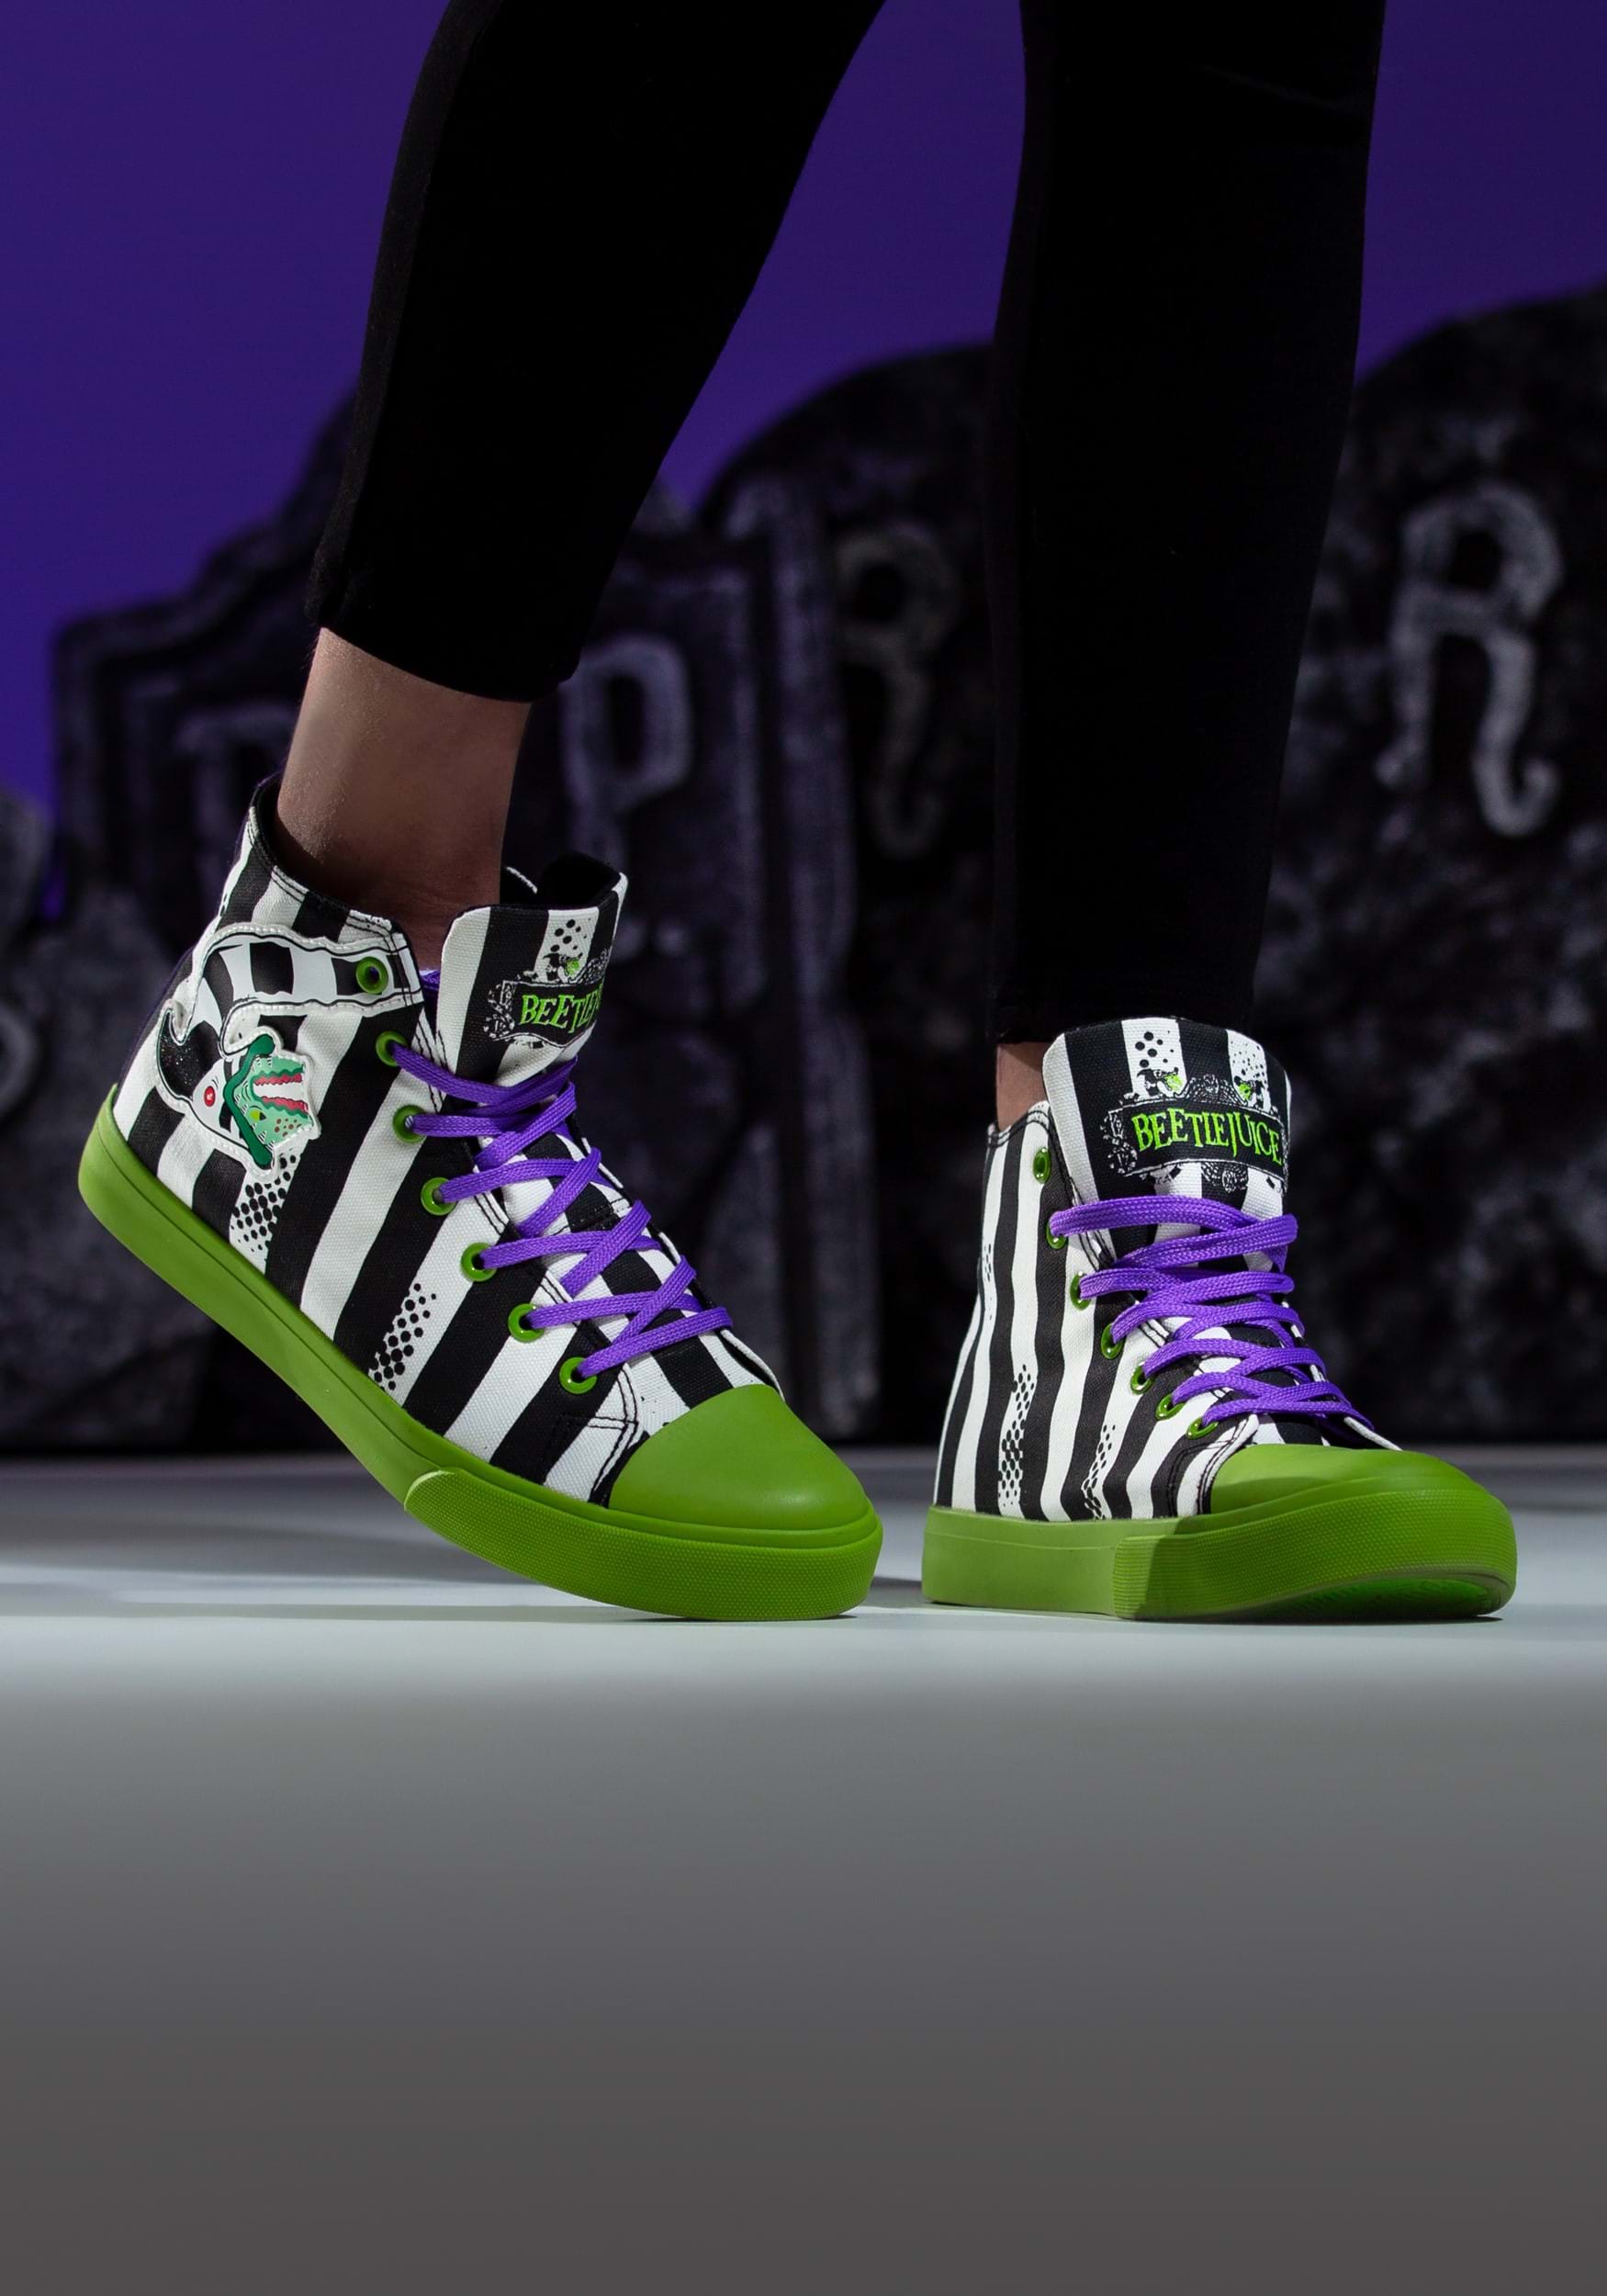 Black And White Striped Beetlejuice Unisex Sneakers